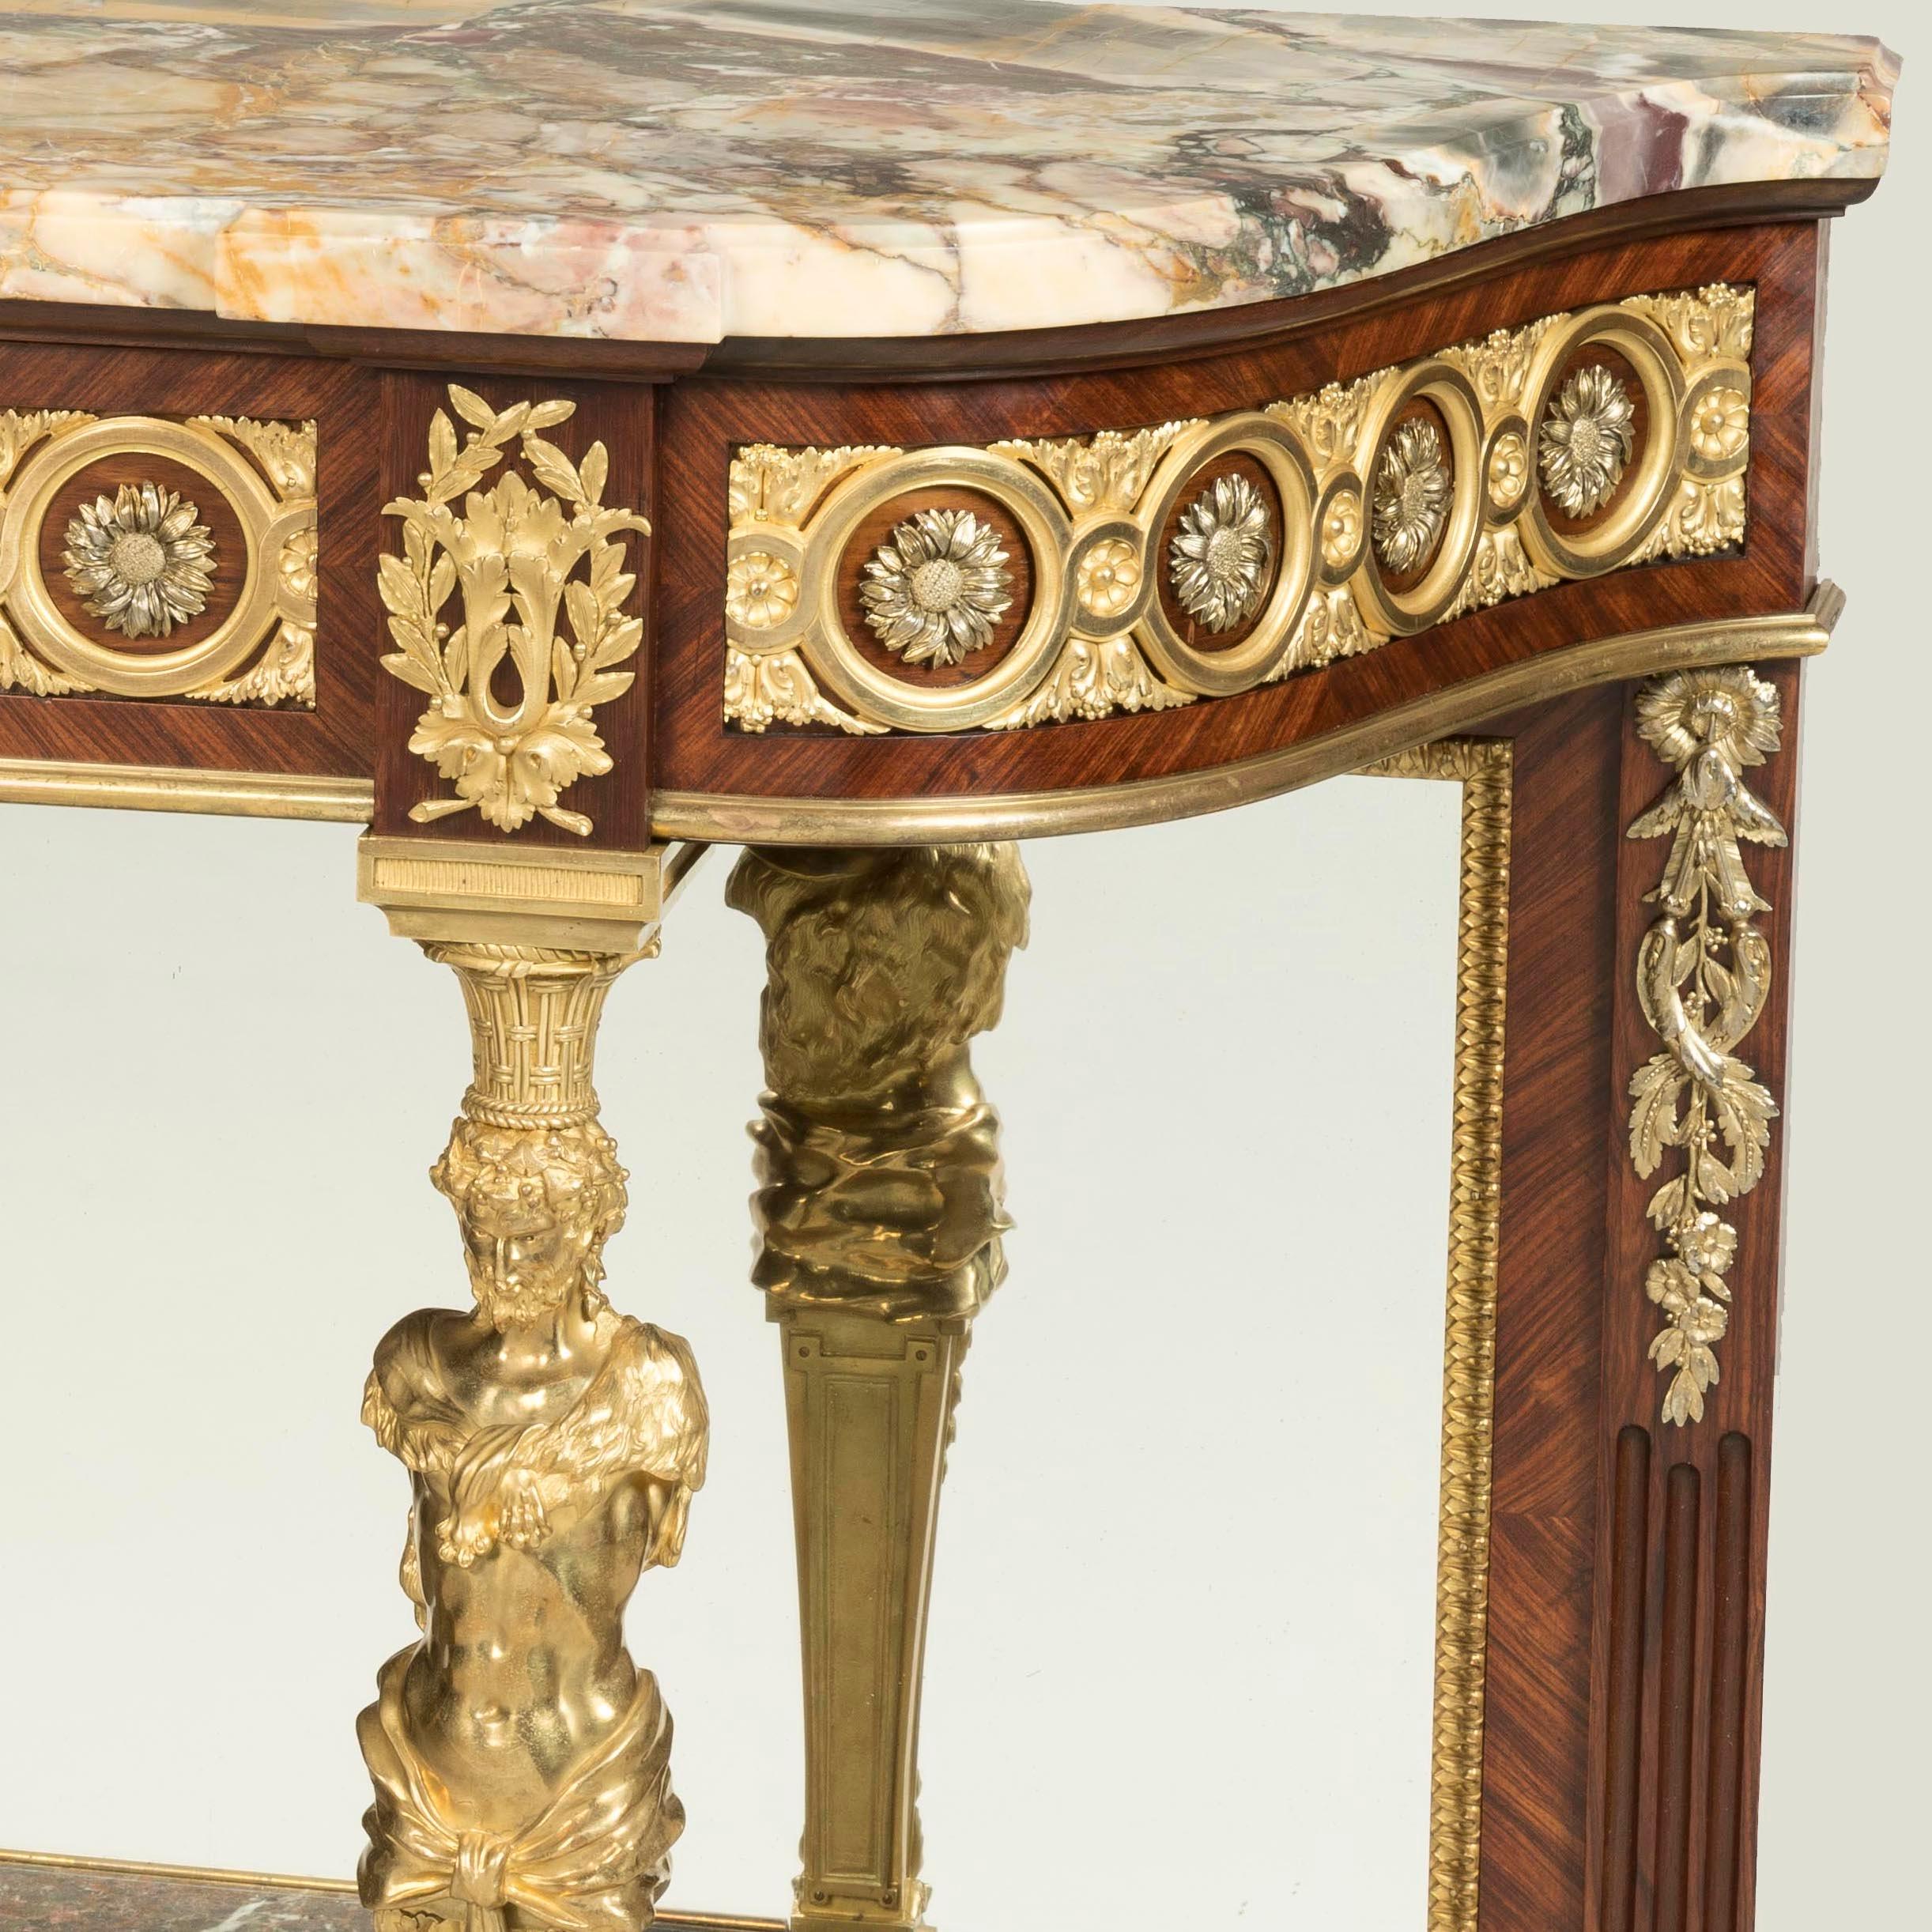 19th Century French Ormolu-Mounted Kingwood Console Table in the Louis XVI Style For Sale 6